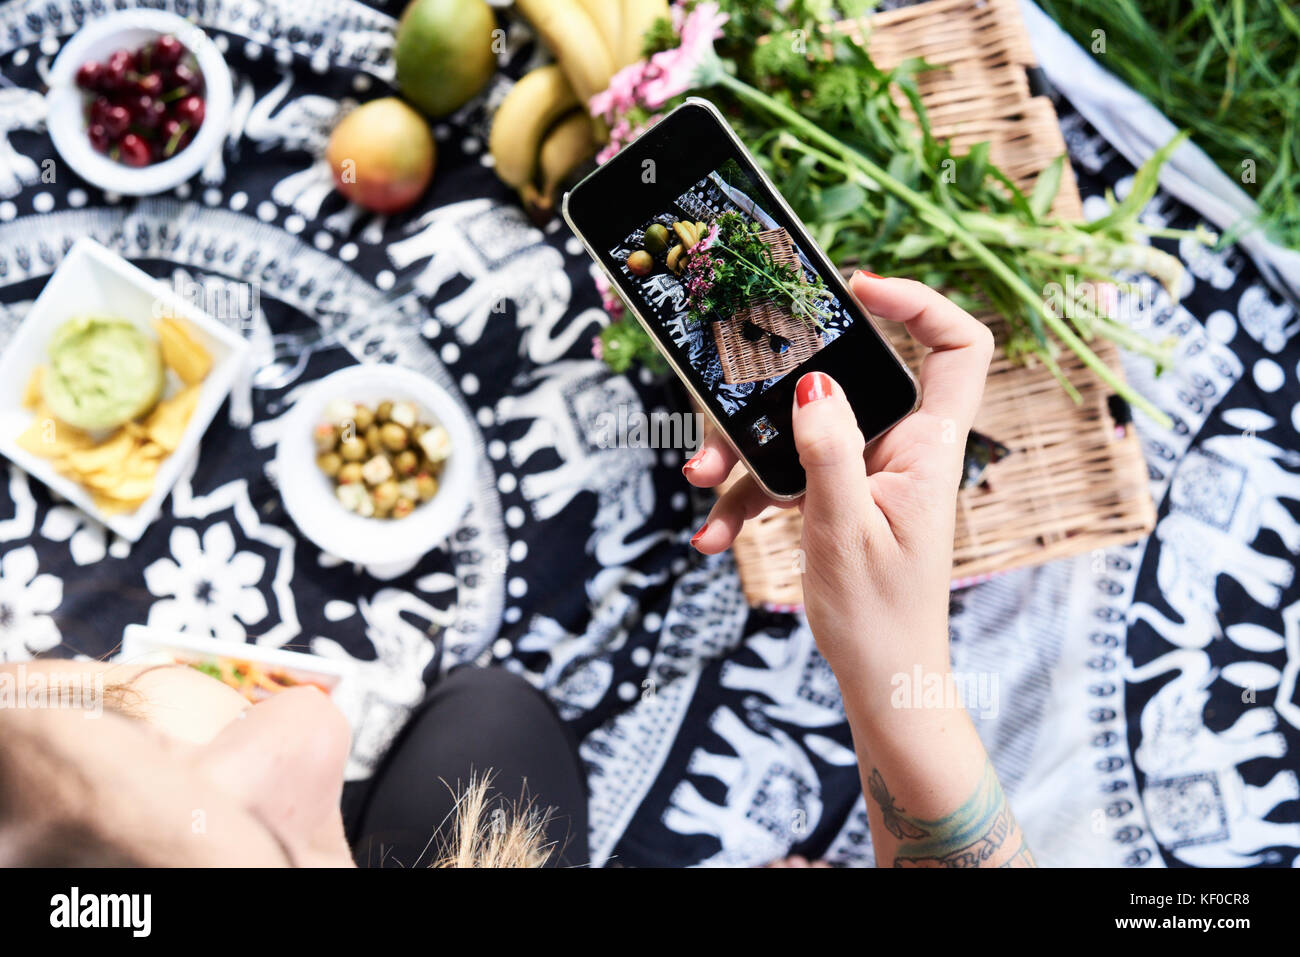 Uk, London, Hampstead Heath Park, overhead unrecognizable girl taking picture of food on picnic blanket, friends picnic at the park Stock Photo